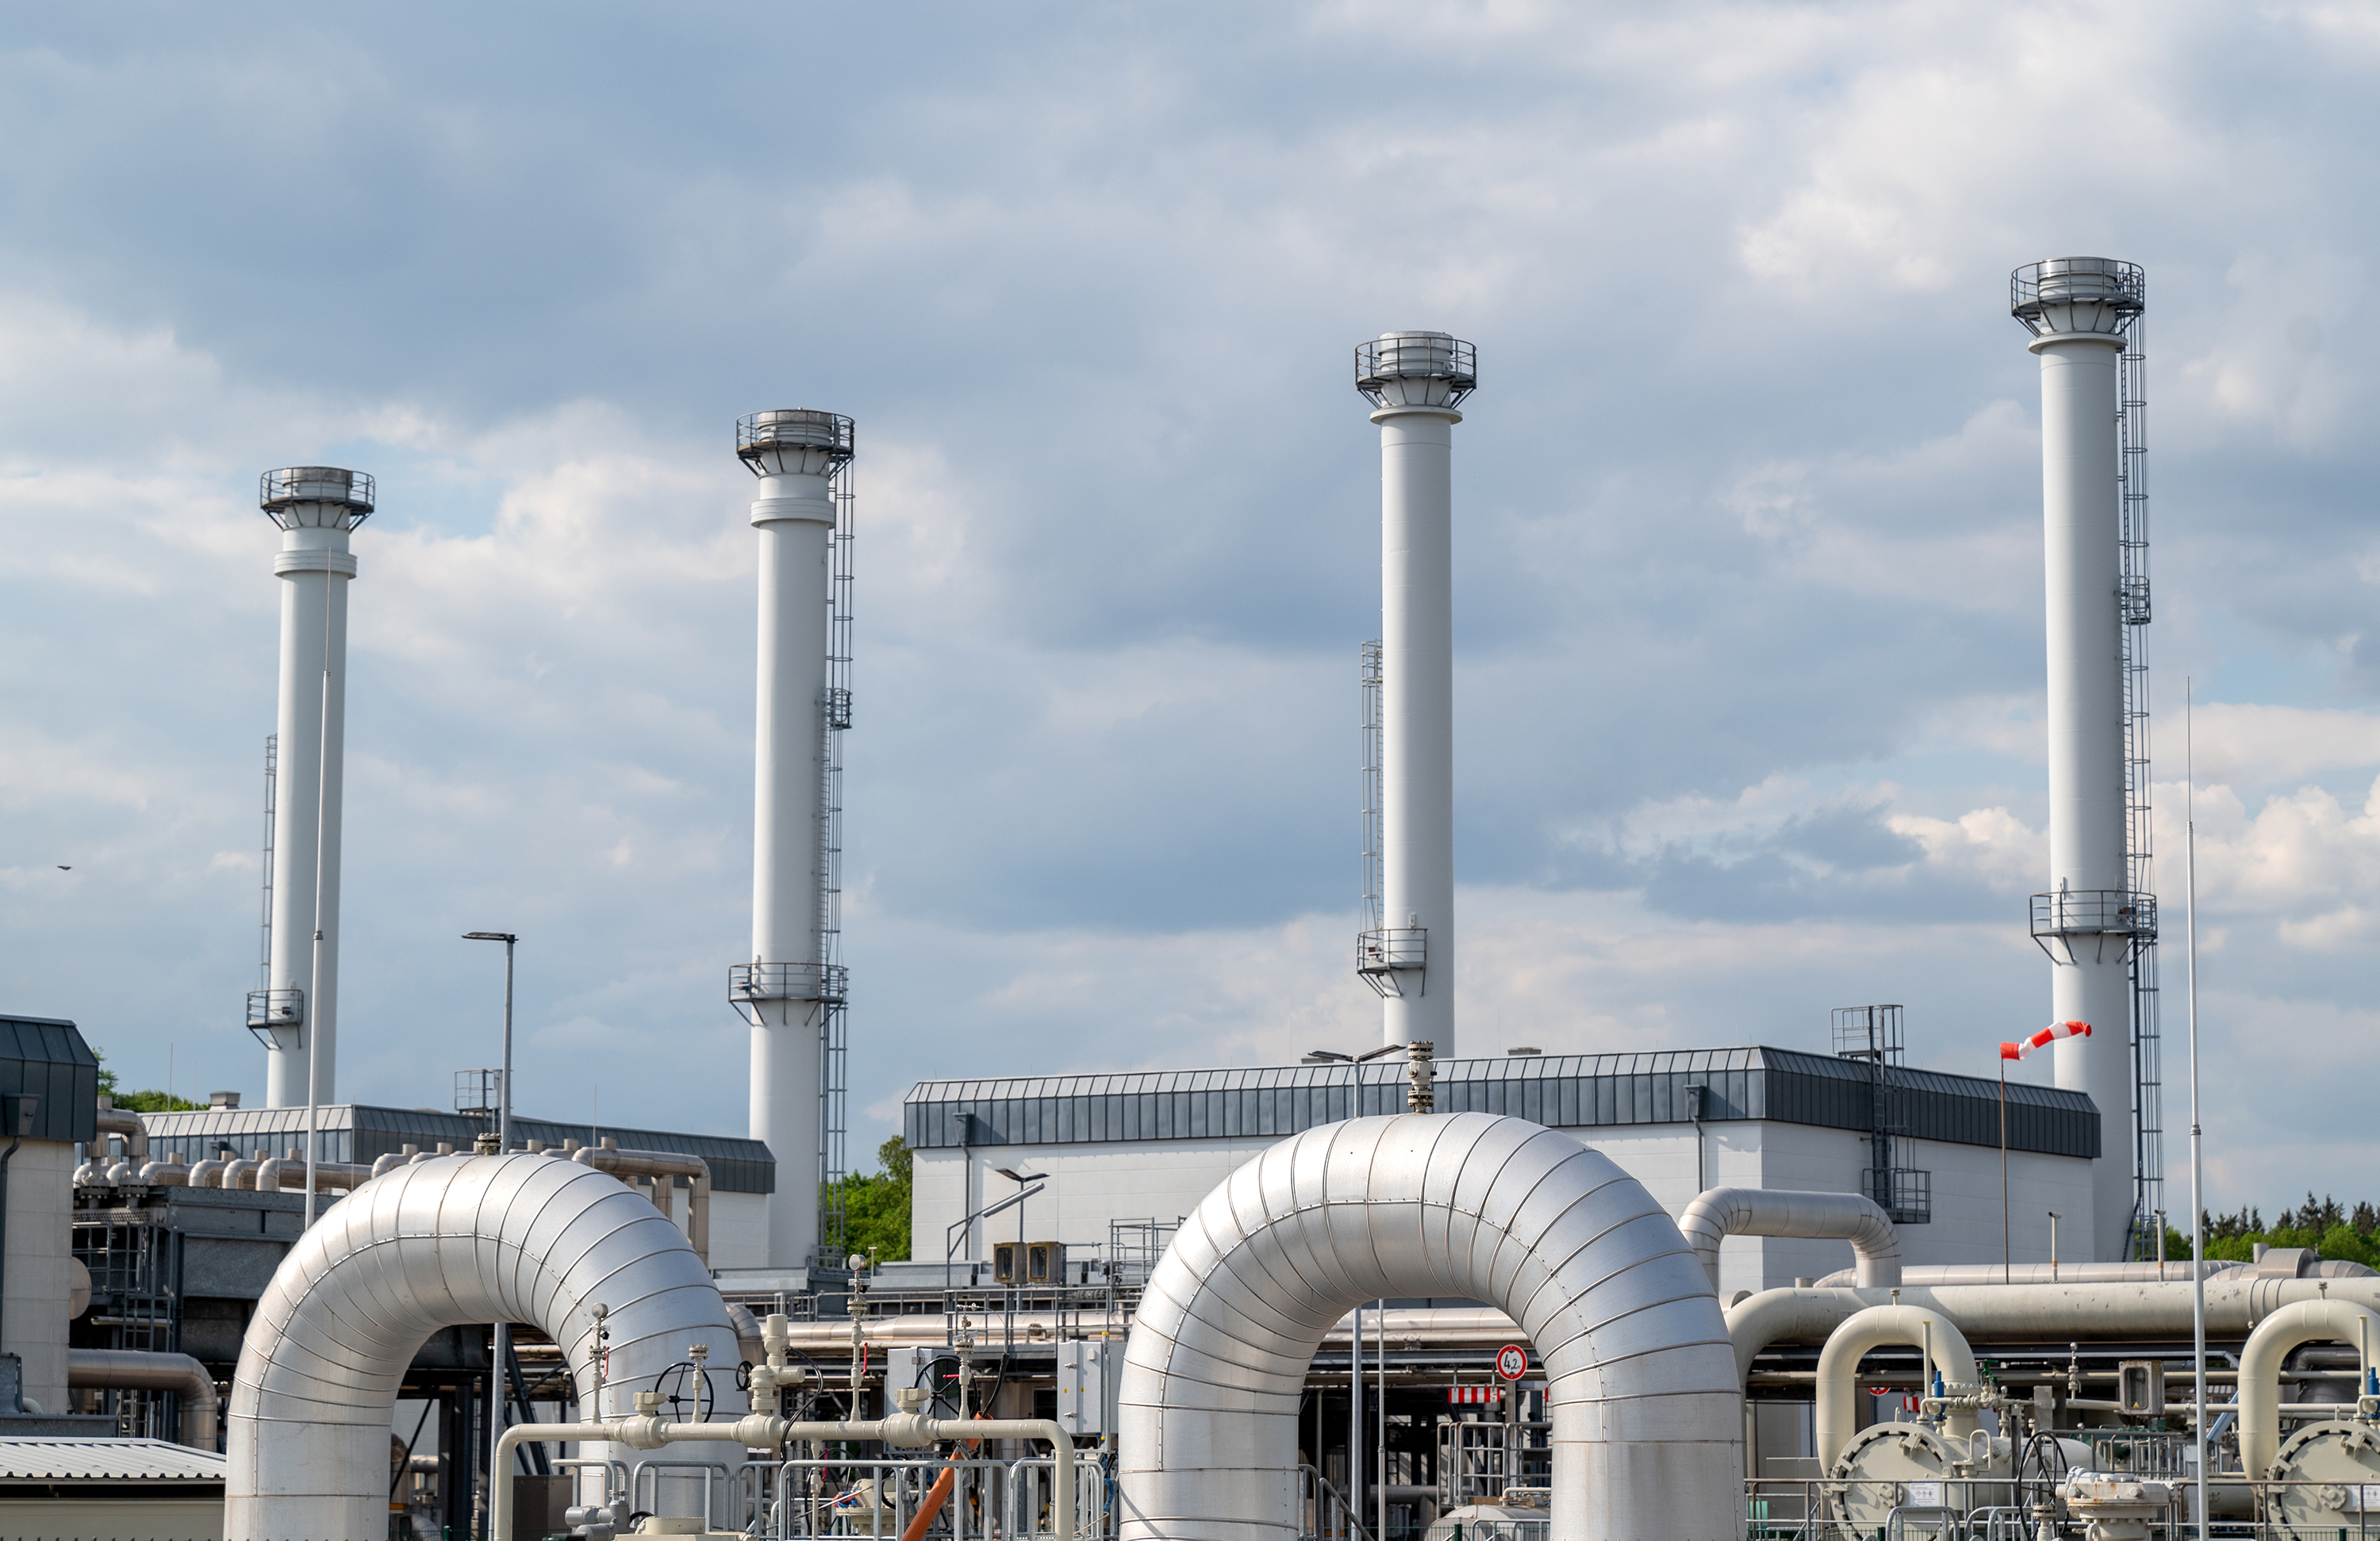 A general view of the Astora underground natural gas storage facility on May 12 in Rehden, Germany. Russia has announced sanctions against dozens of western energy companies, including Gazprom Germania, of which Astora is a subsidiary. 